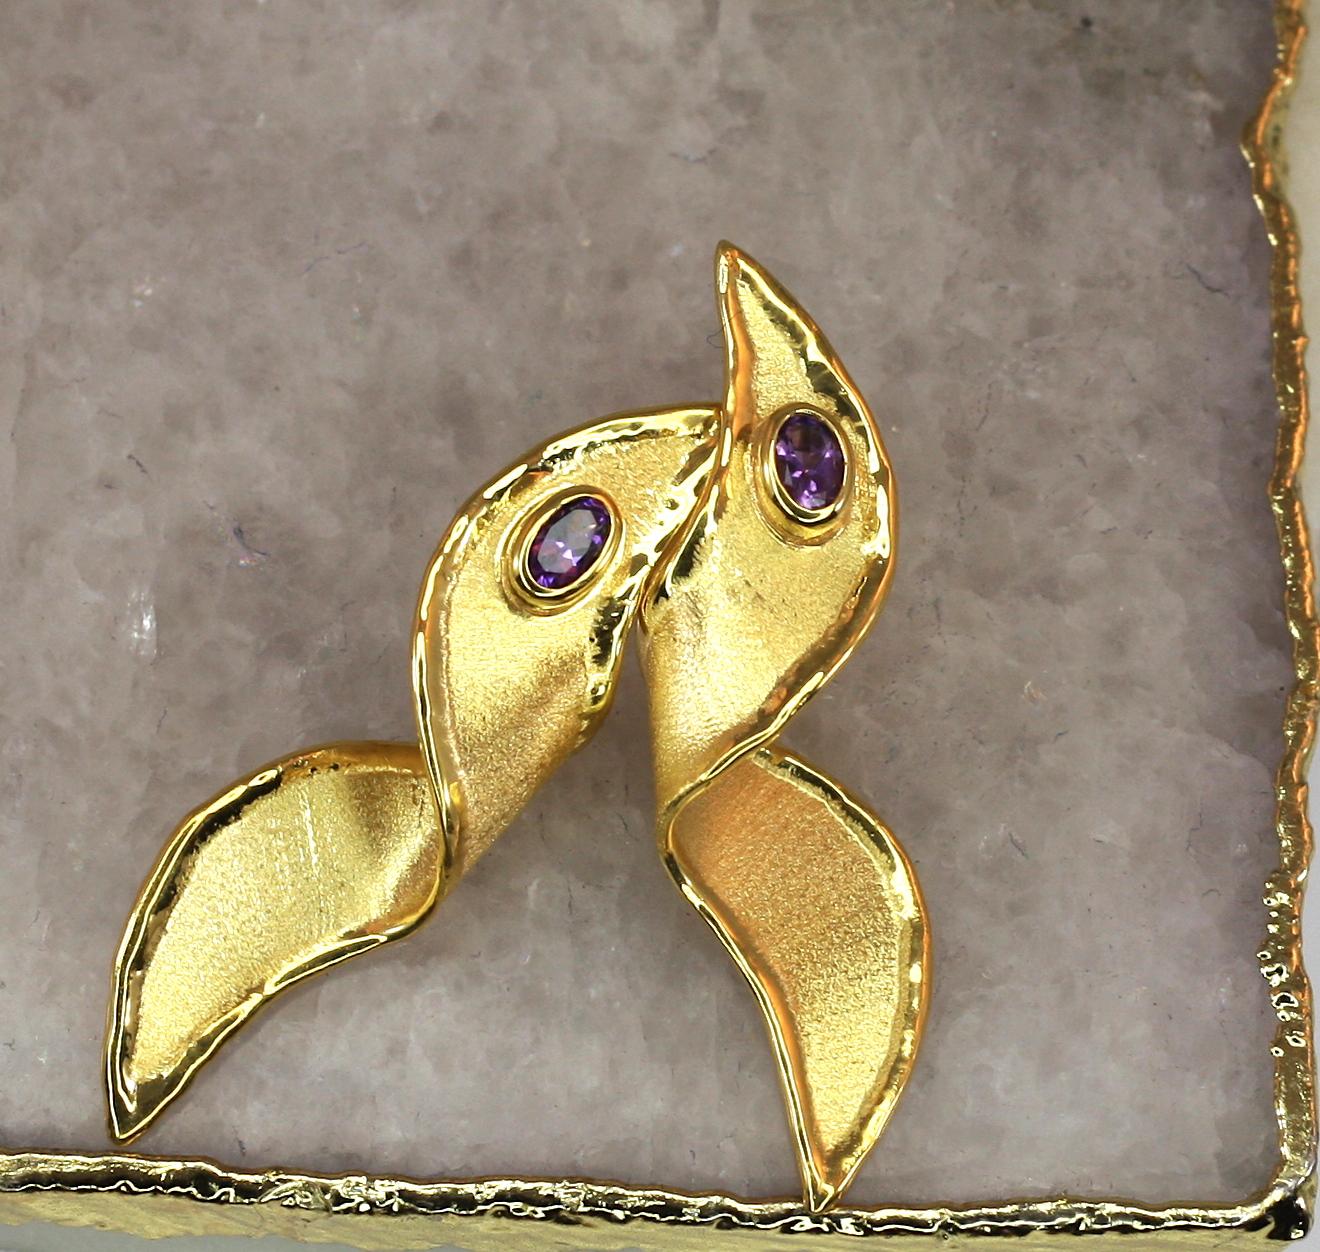 Oval Cut Yianni Creations Artisan Earrings with Amethyst in 18 Karat Gold For Sale